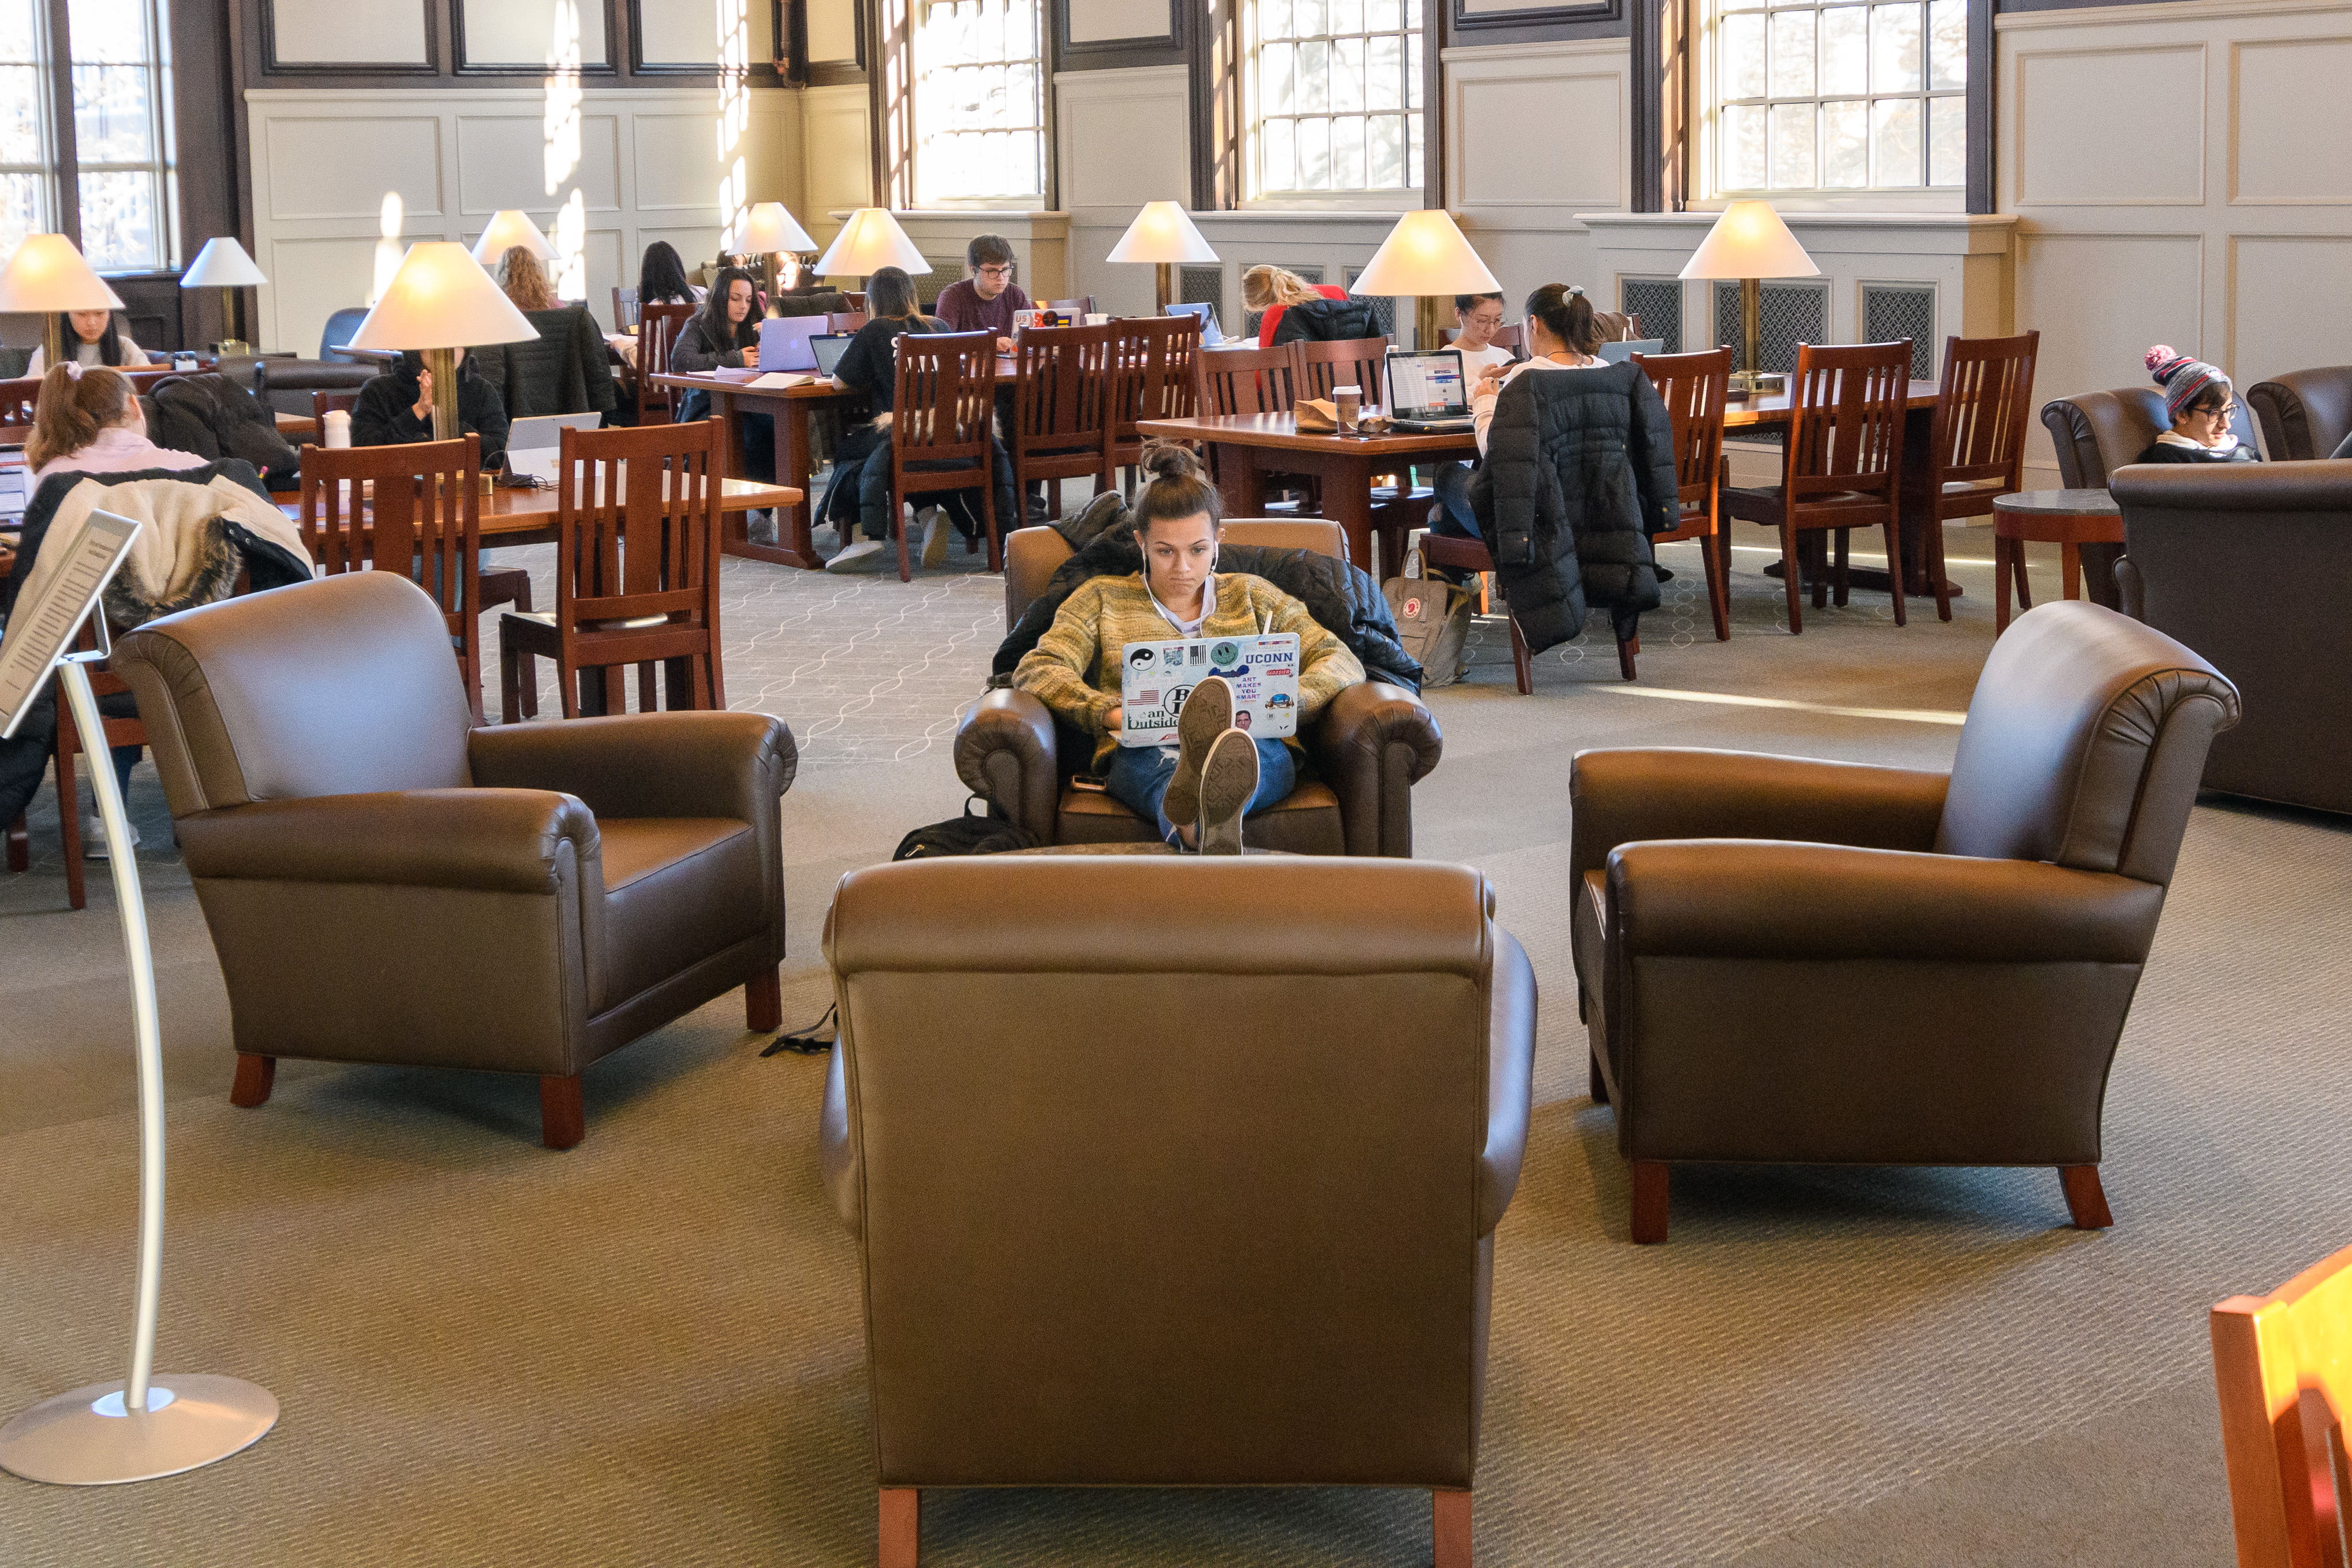 A student sits with her feet up while studying inthe Wilbur Cross South Reading Room.